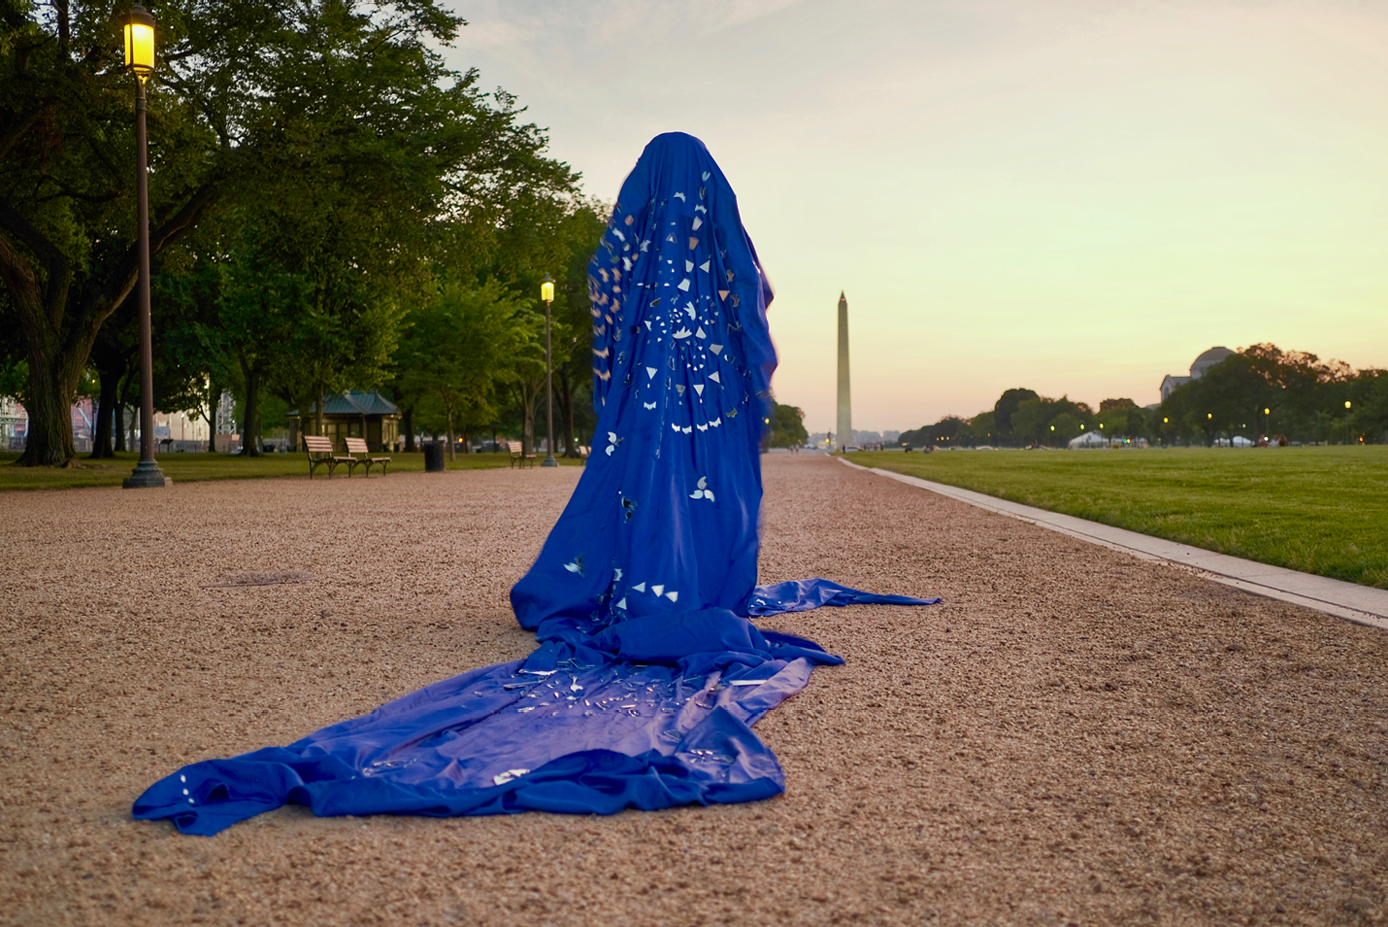 Image of a person standing on a long road. The background of the image shows the Washington Monument, a white obelisk shaped building. The scene is set in the evening. There is a figure standing in the middle of the foreground, in a blue garment with mirrorred patterns and a long train.